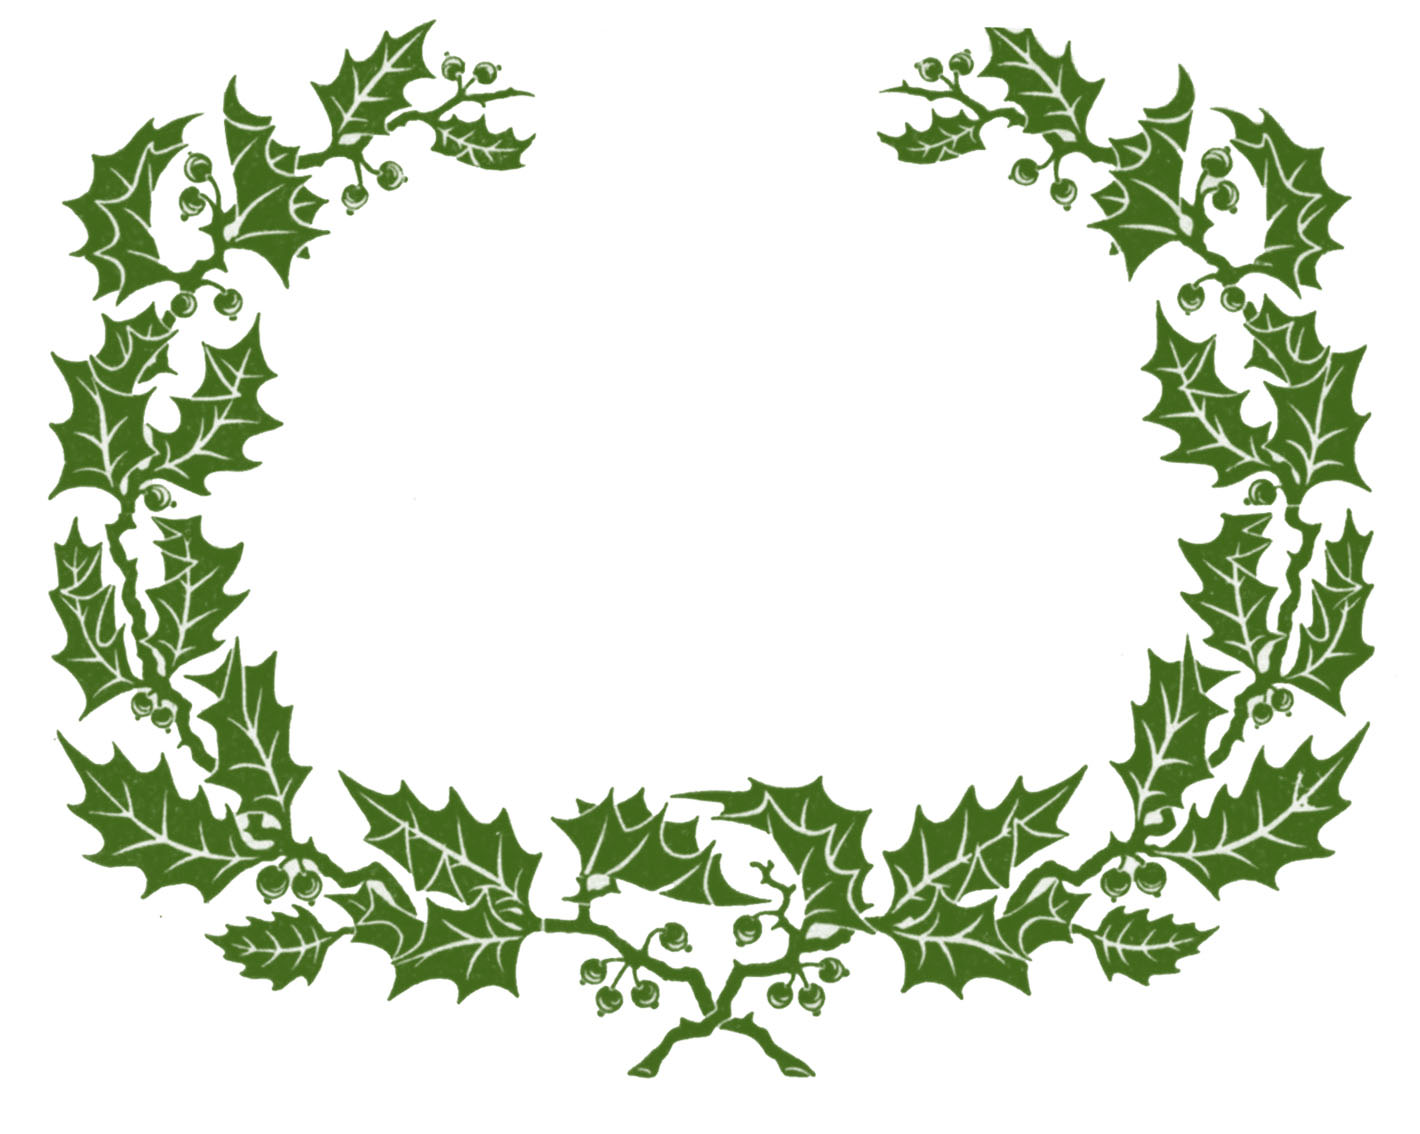 Vintage Clip Art Holly Wreath Graphic Frame The